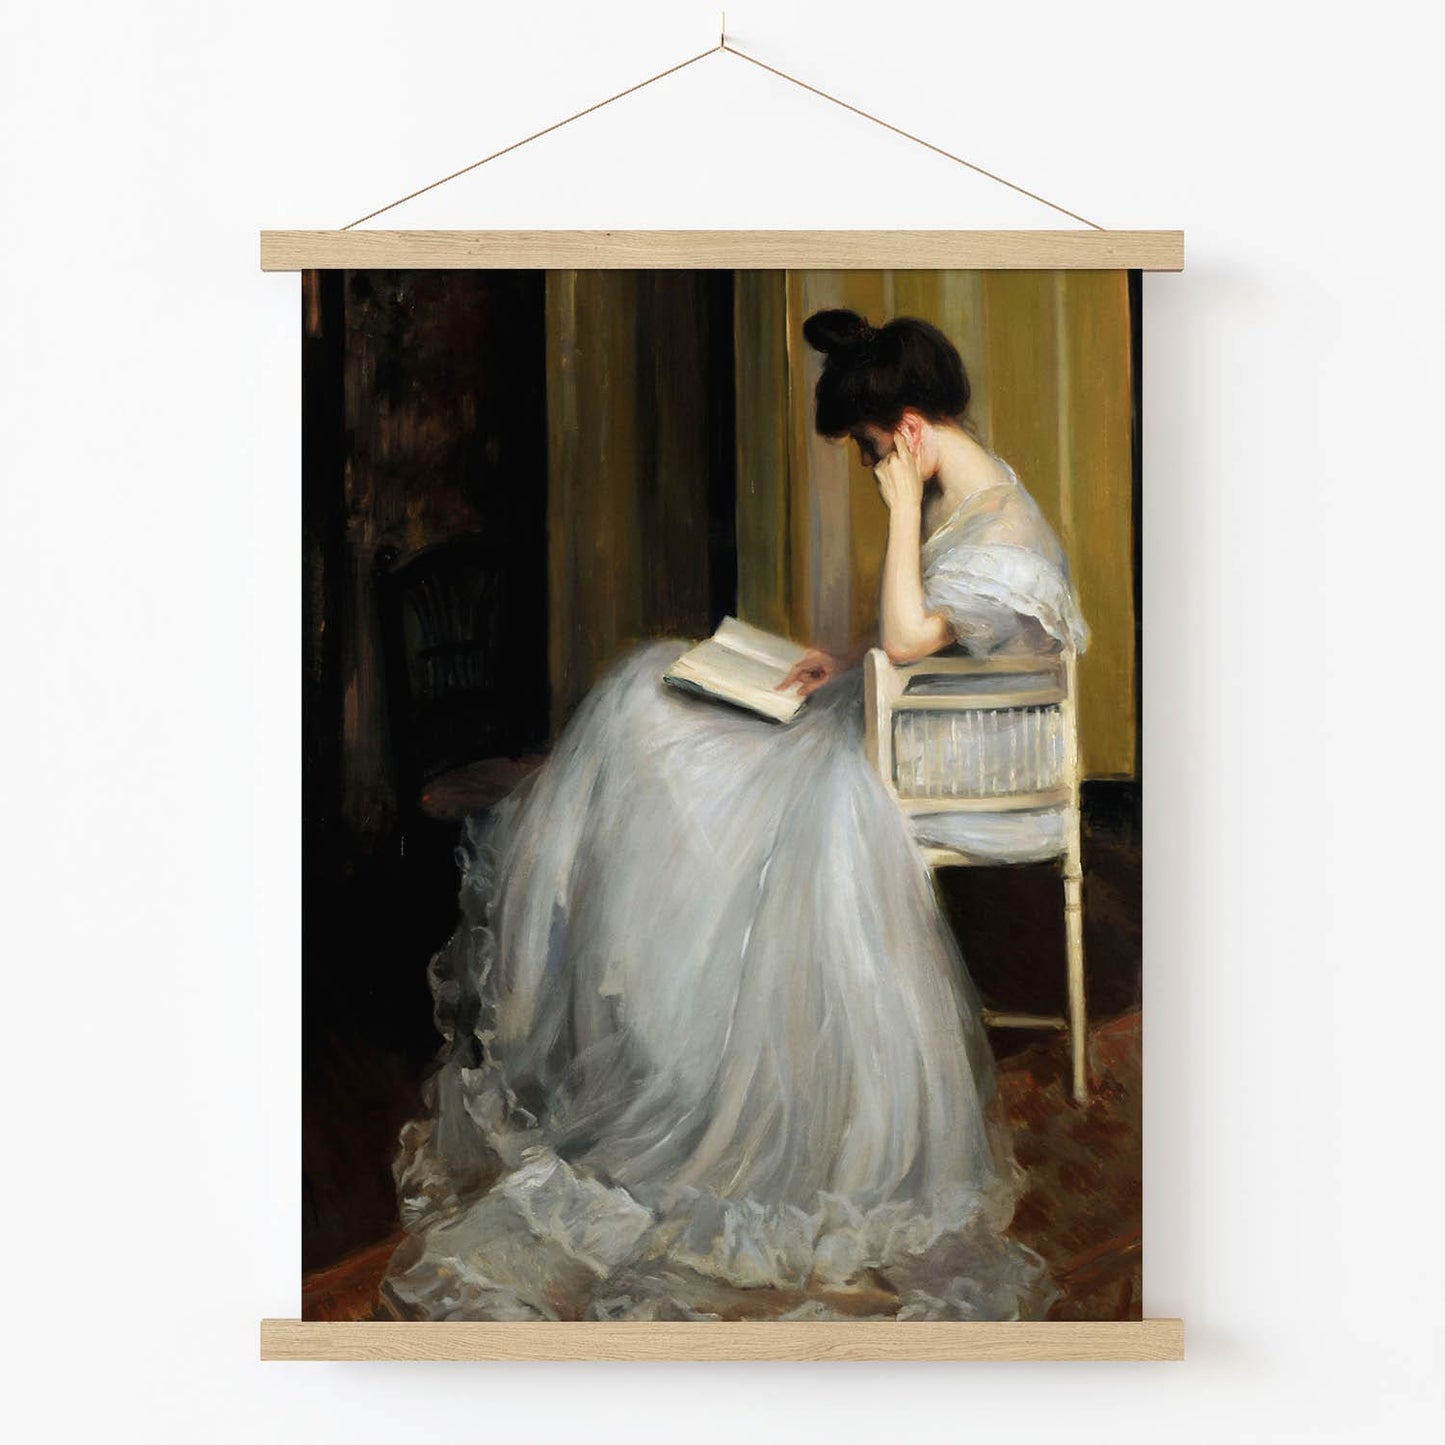 Woman Reading Art Print in Wood Hanger Frame on Wall